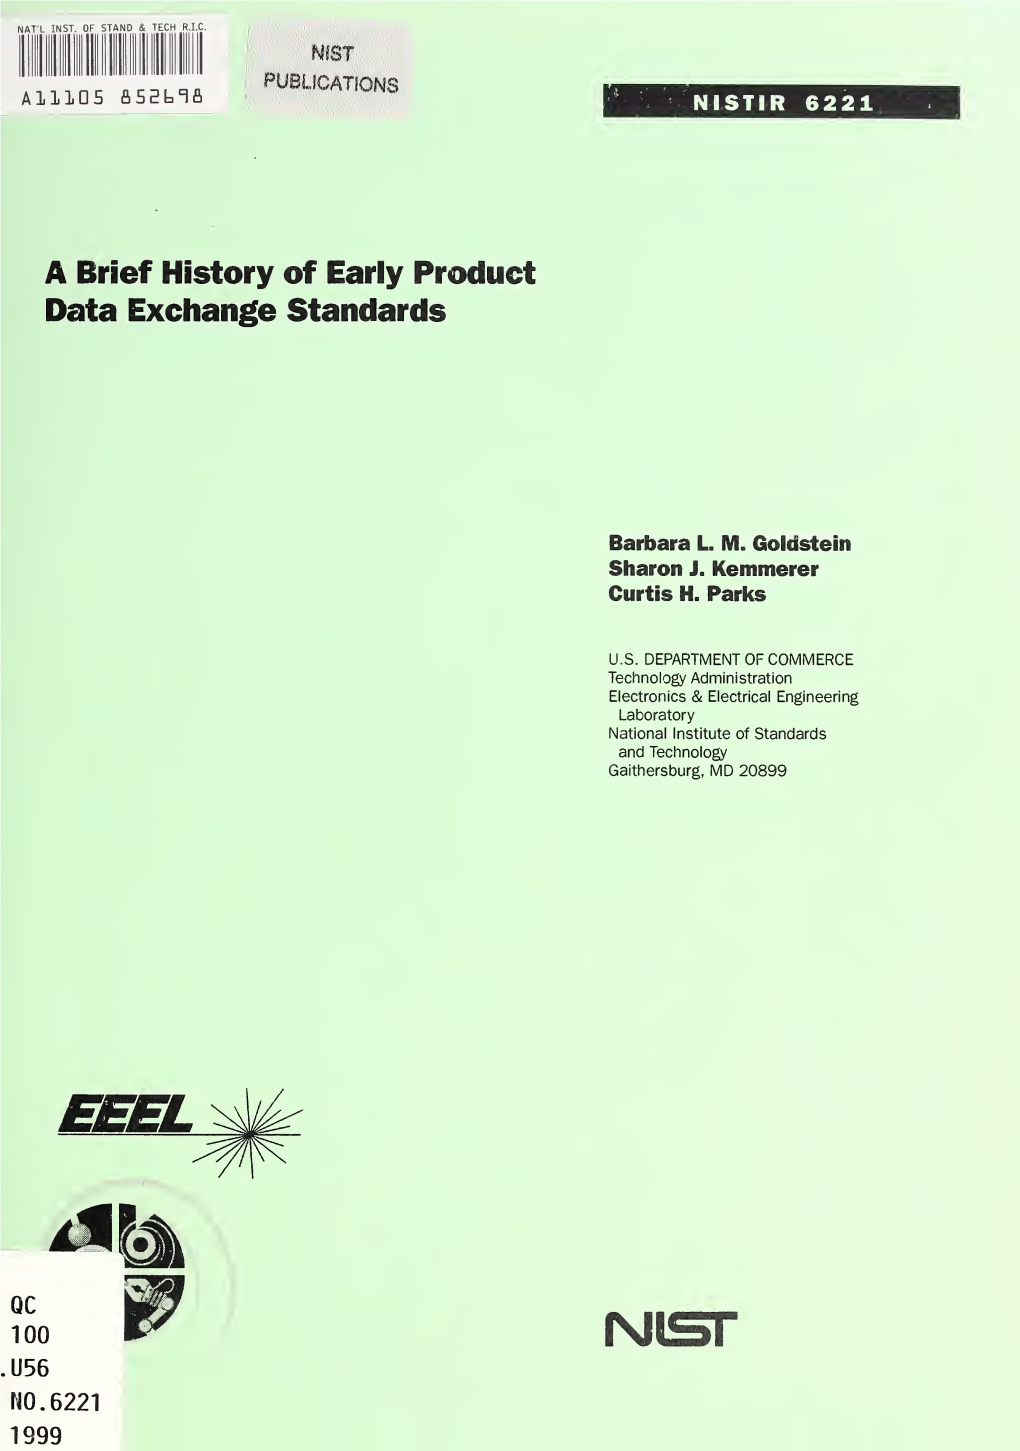 A Brief History of Early Product Data Exchange Standards